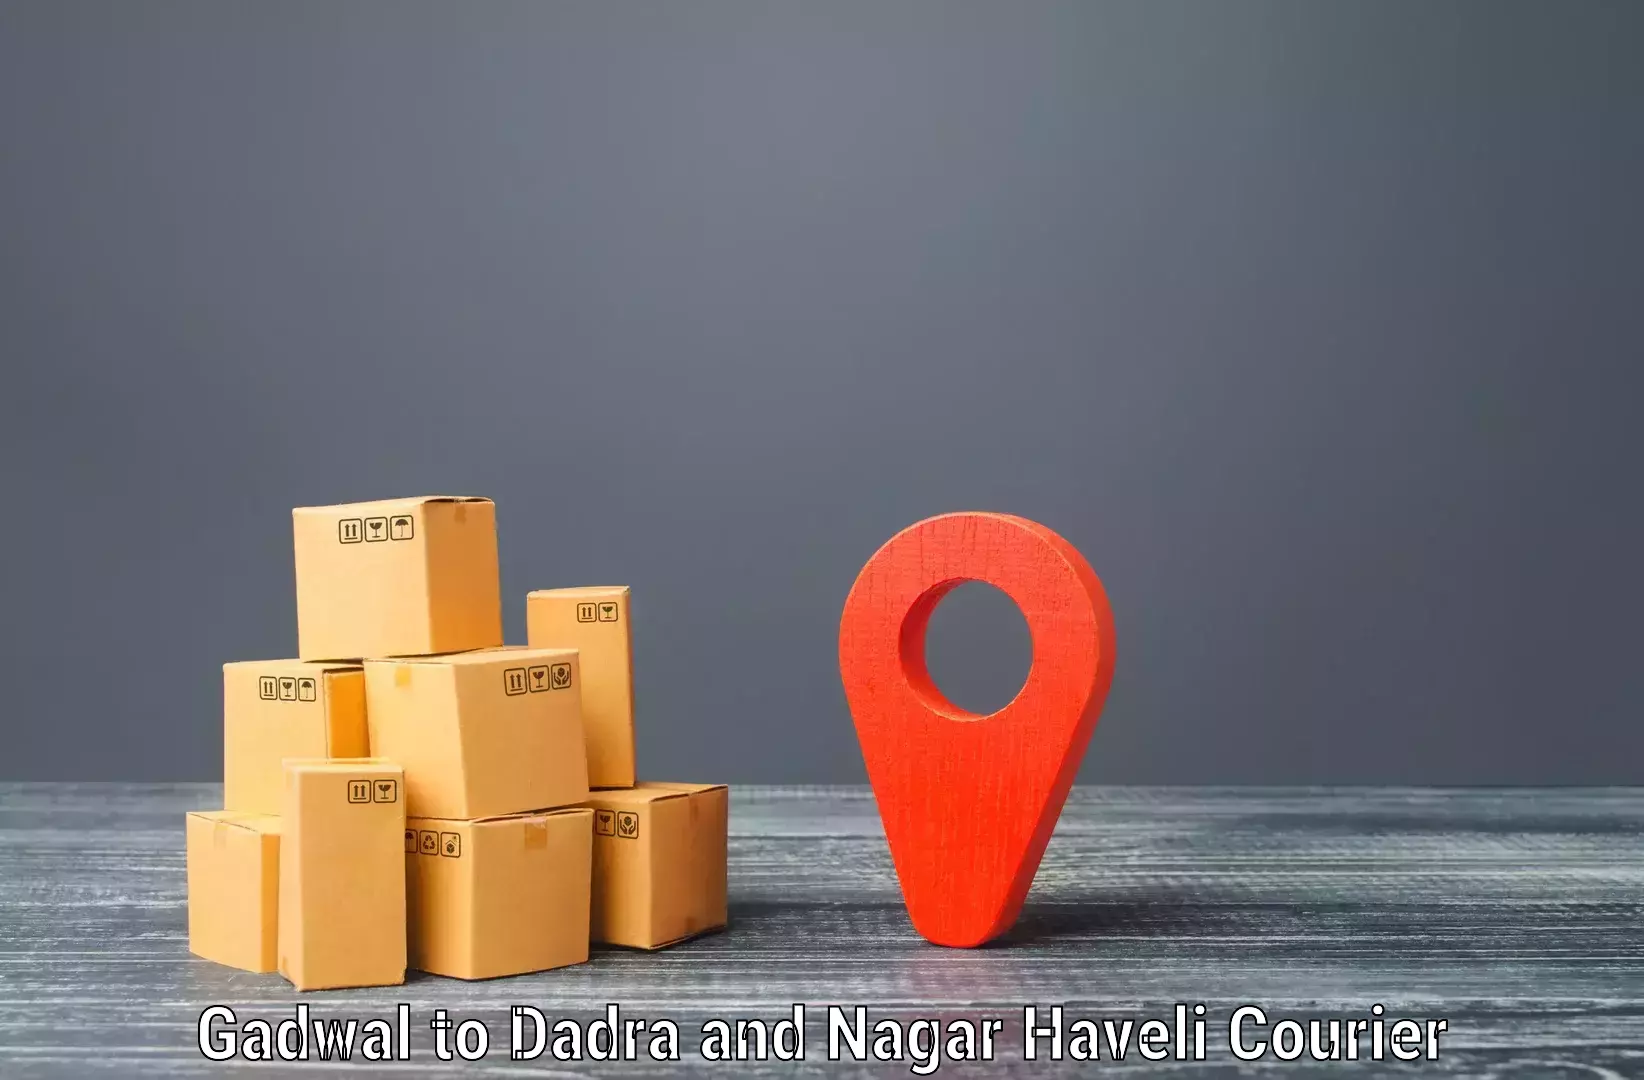 Courier services Gadwal to Dadra and Nagar Haveli